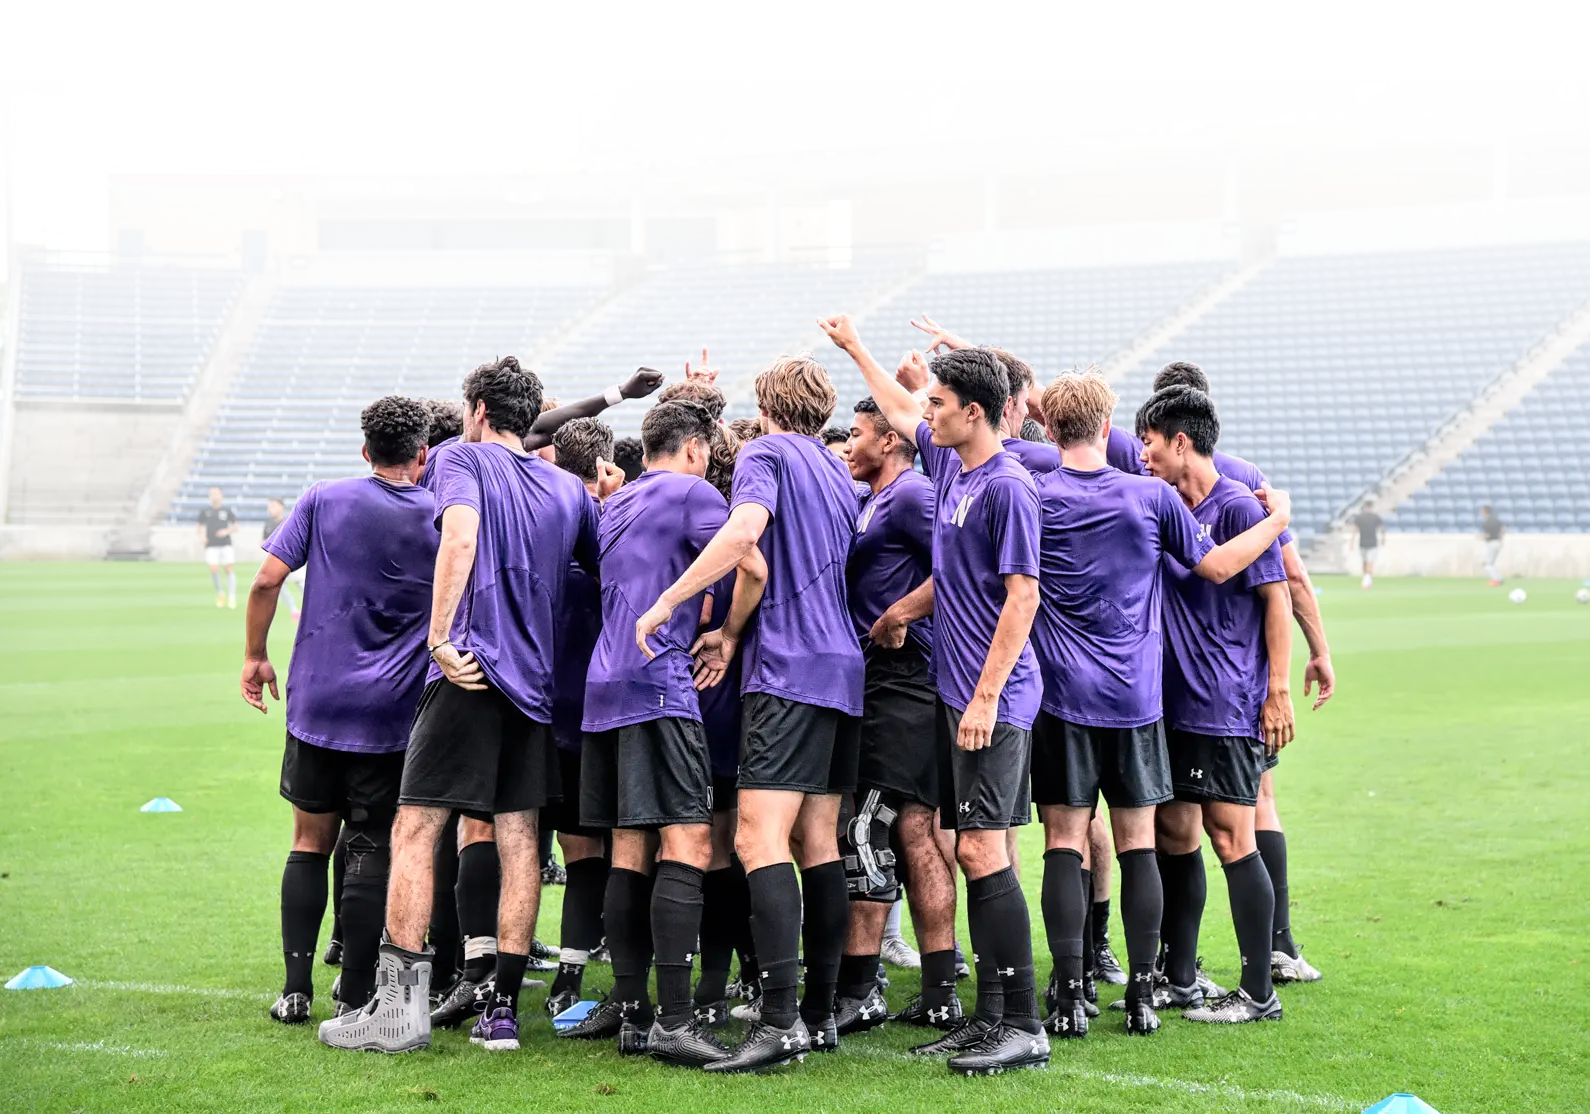 Soccer players in a huddle